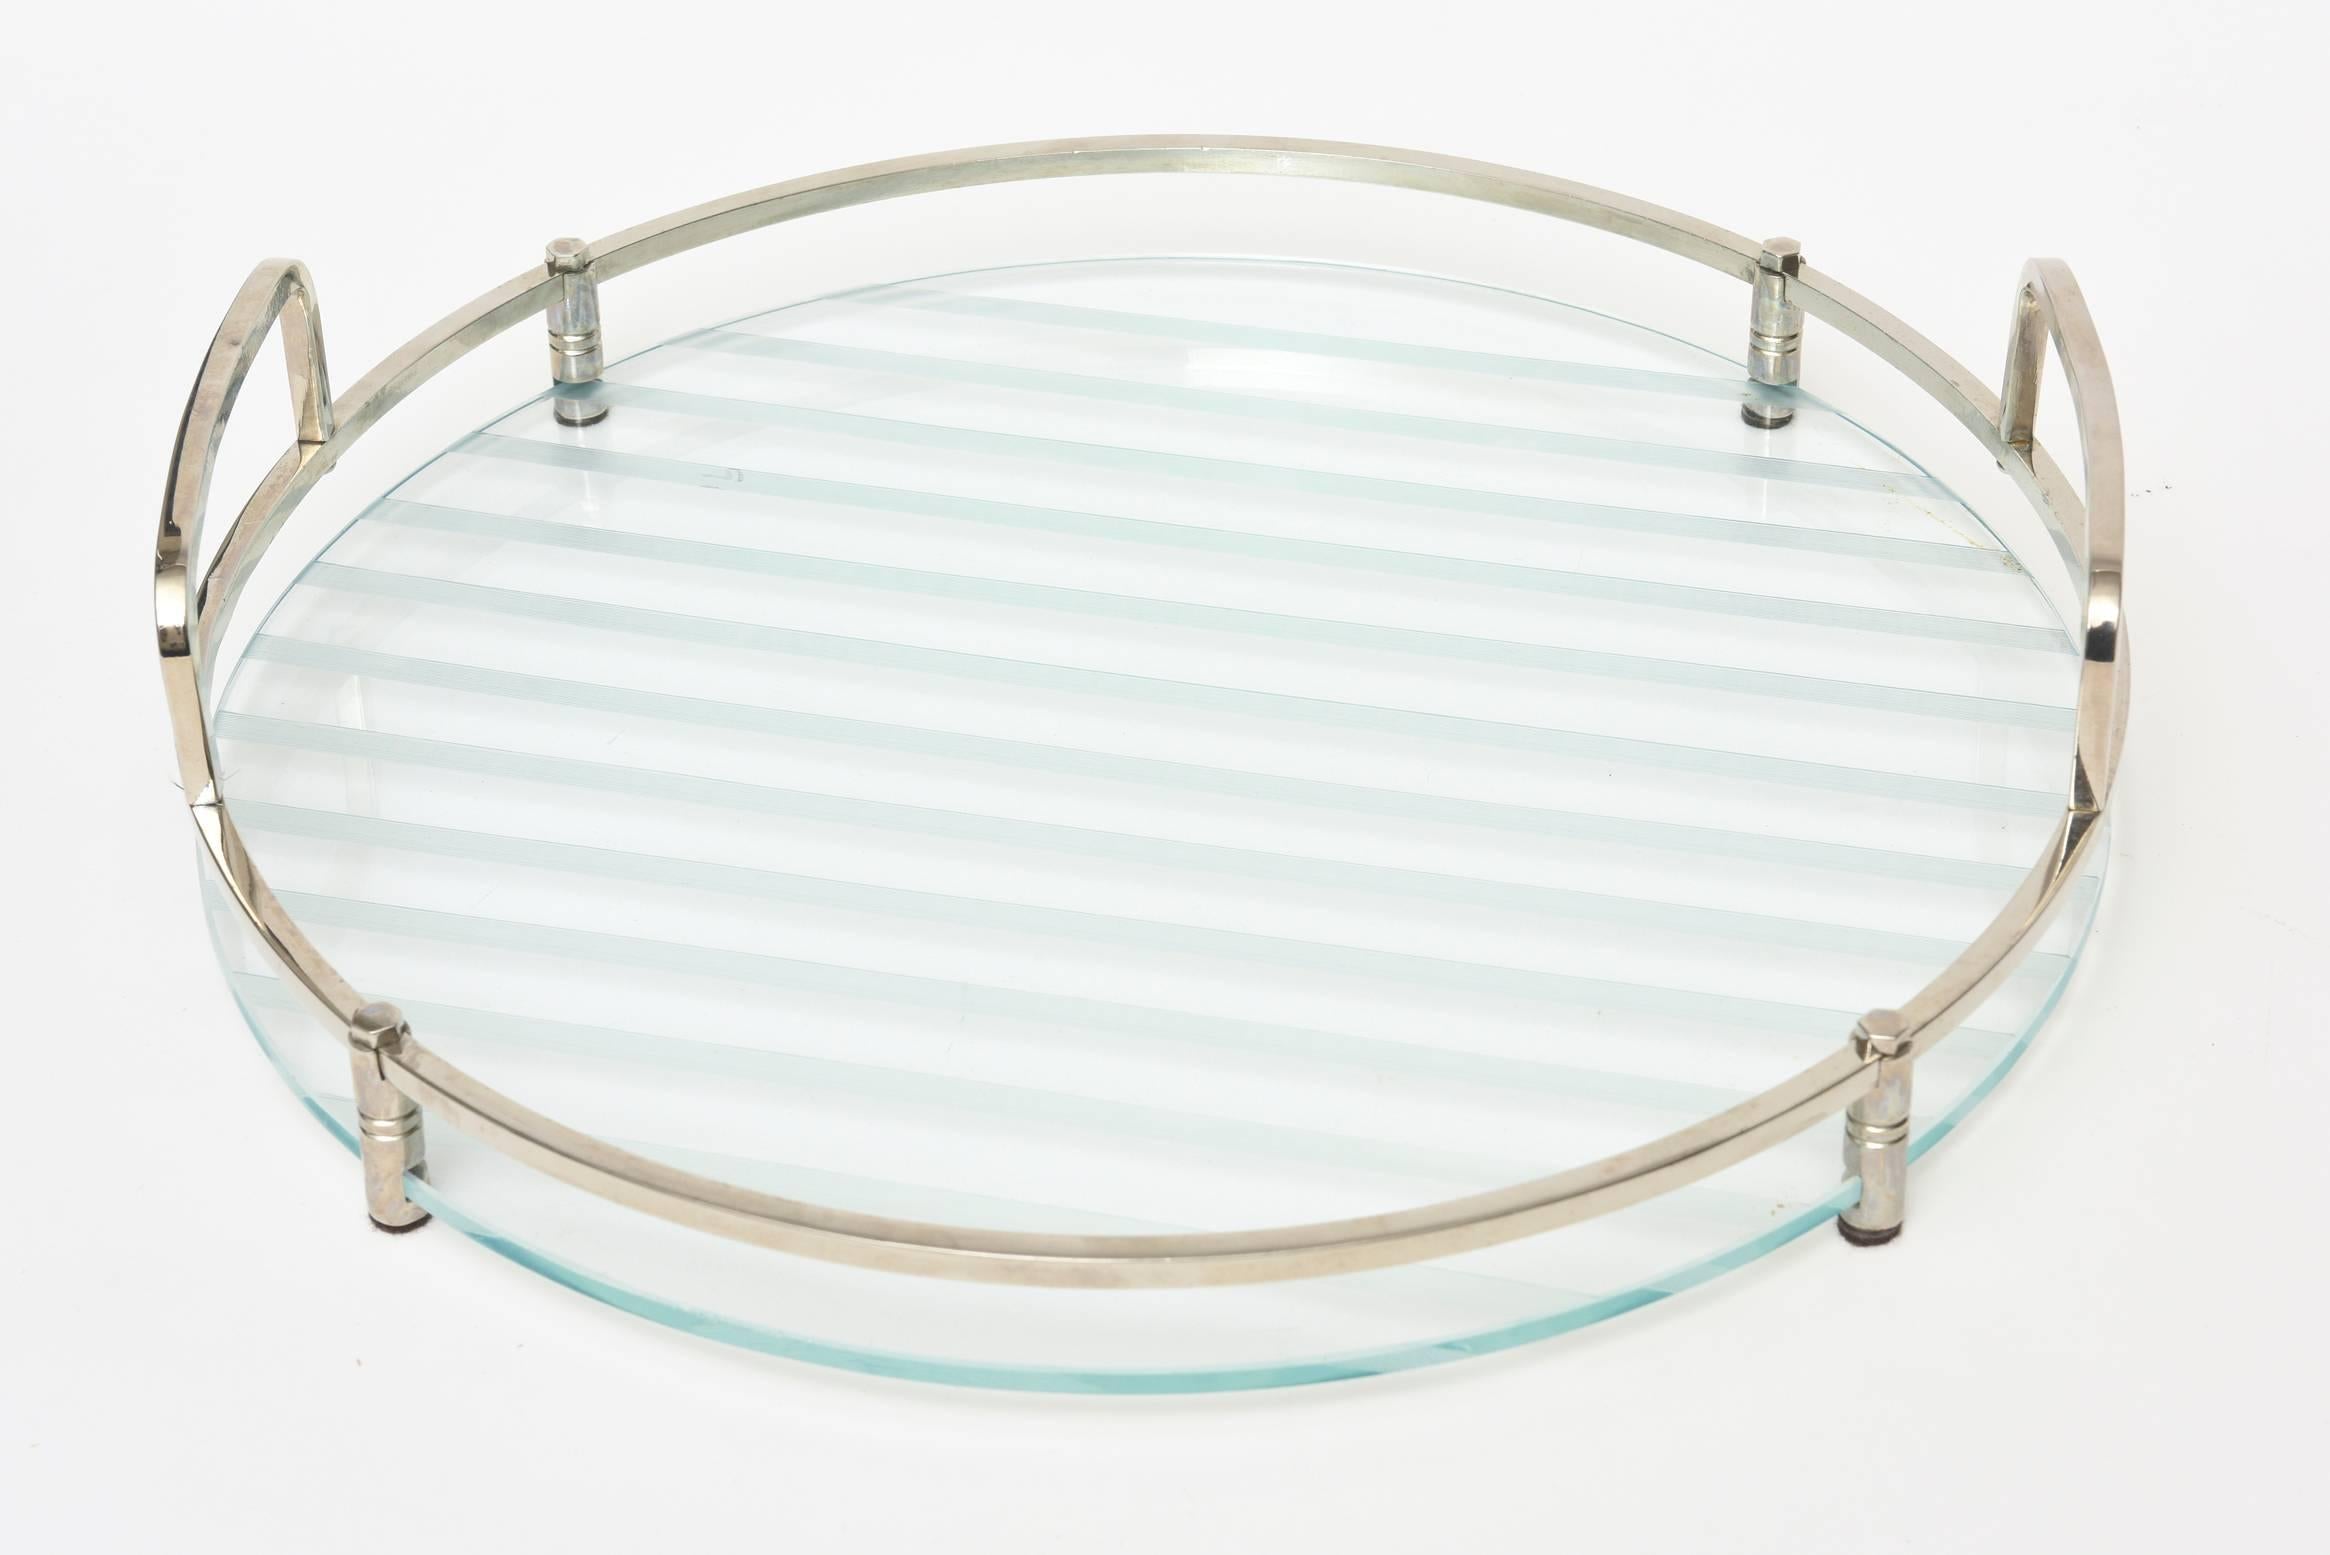 This round versatile etched glass tray with white lines is great barware and or a serving tray. The chrome adds to the modernity of it even though it is from the 1970s. The height below is the height to the top of the handles.
This could be used